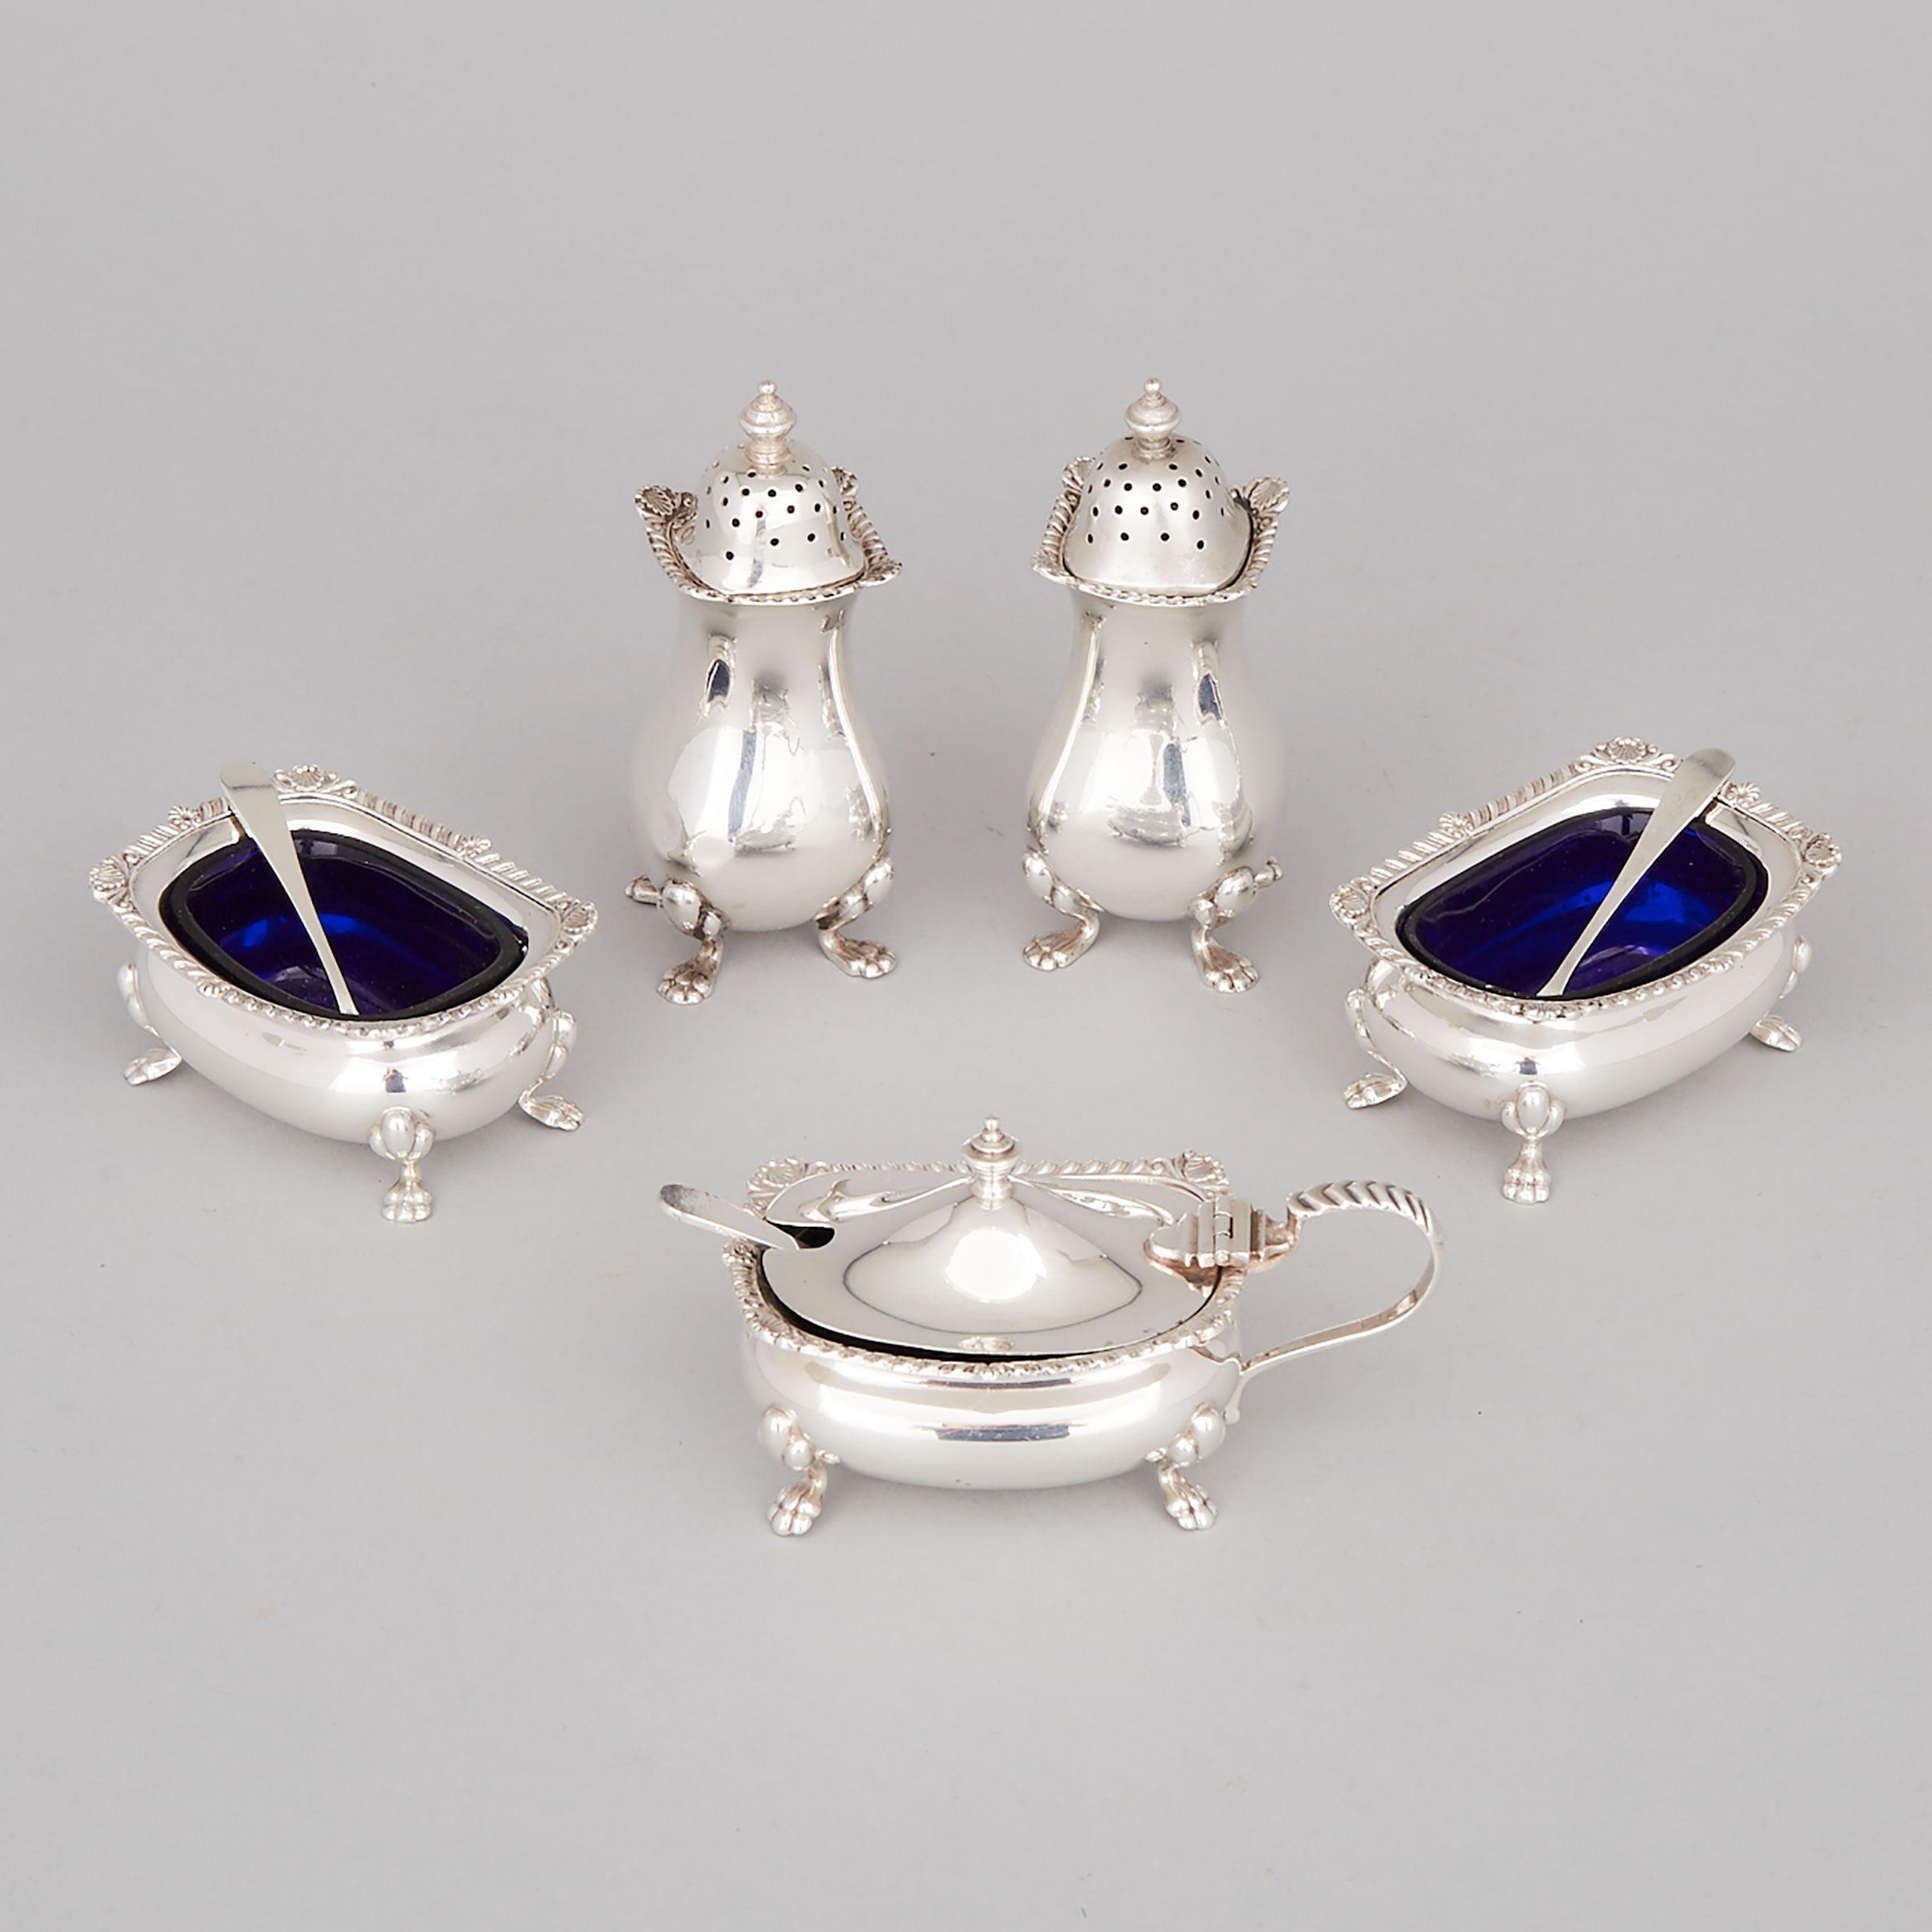 Canadian Silver Condiment Set, Henry Birks and Sons, Montreal, Que., 1955-57